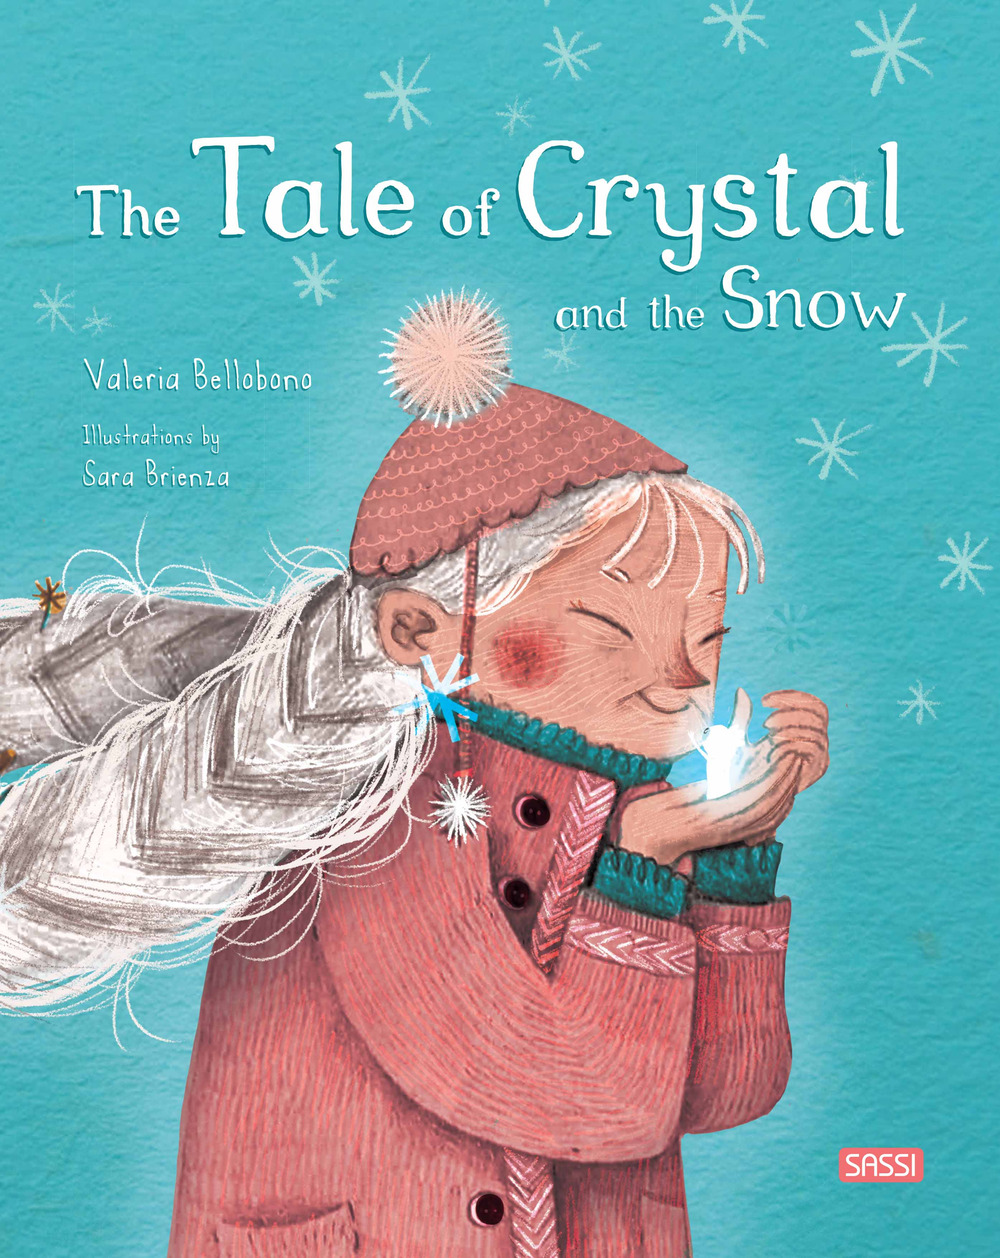 The tale of crystal and the snow. Ediz. a colori